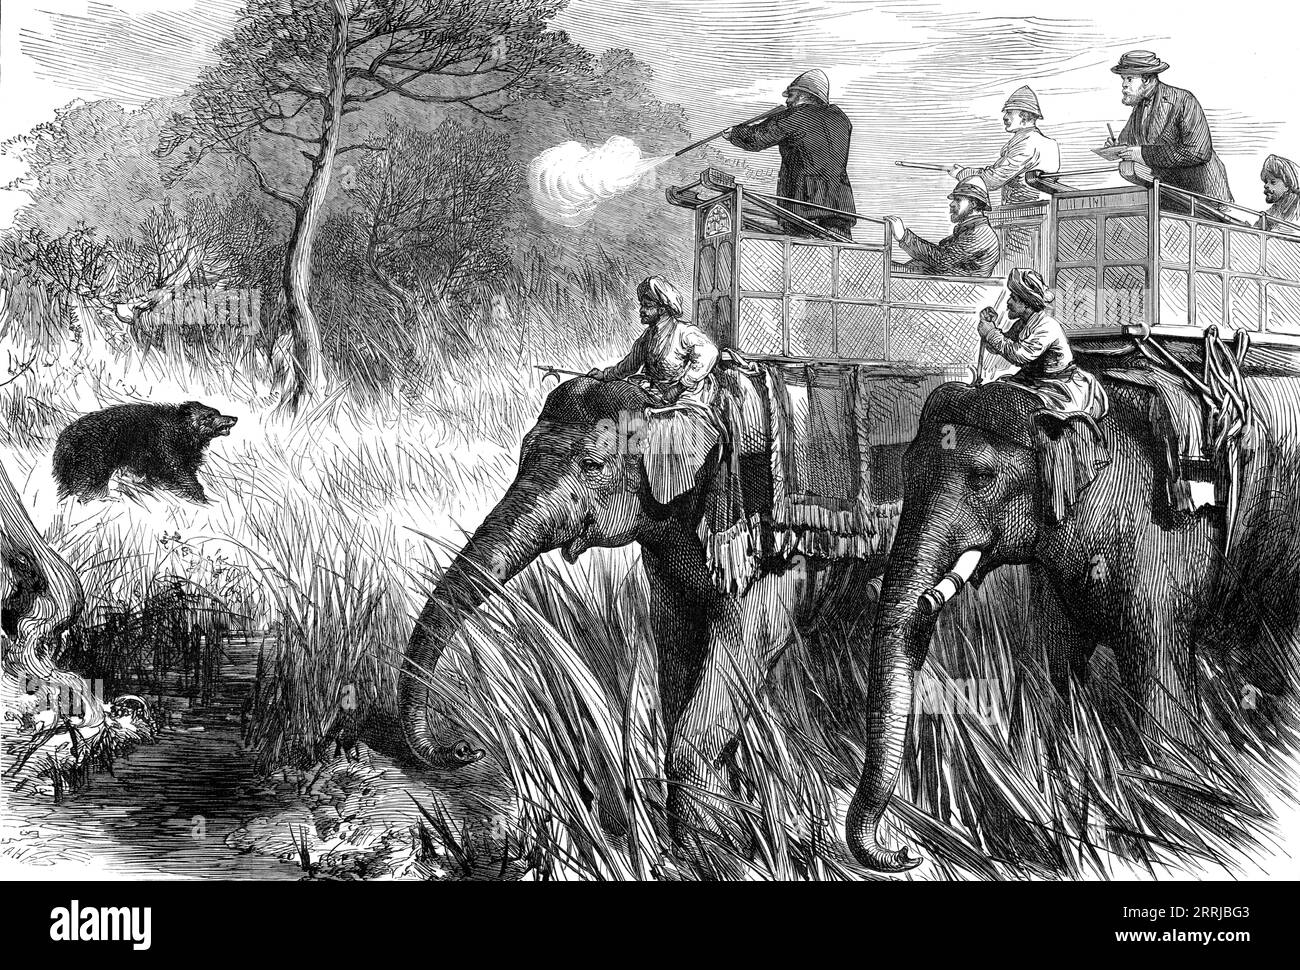 The Prince of Wales in the Terai: Shooting a Bear, from a sketch by one of our special artists,  1876. The future King Edward VII in India. 'The first bear got a bullet before his Royal Highness came up to it; but the second came out of the bit of long grass in the direction of the Prince, and it crossed the stream and was making off to a wood close at hand, when he got a clean shot. The hit was particularly good, the bullet entering and going right through the body at the chest, killing the animal instantly'. From &quot;Illustrated London News&quot;, 1876. Stock Photo